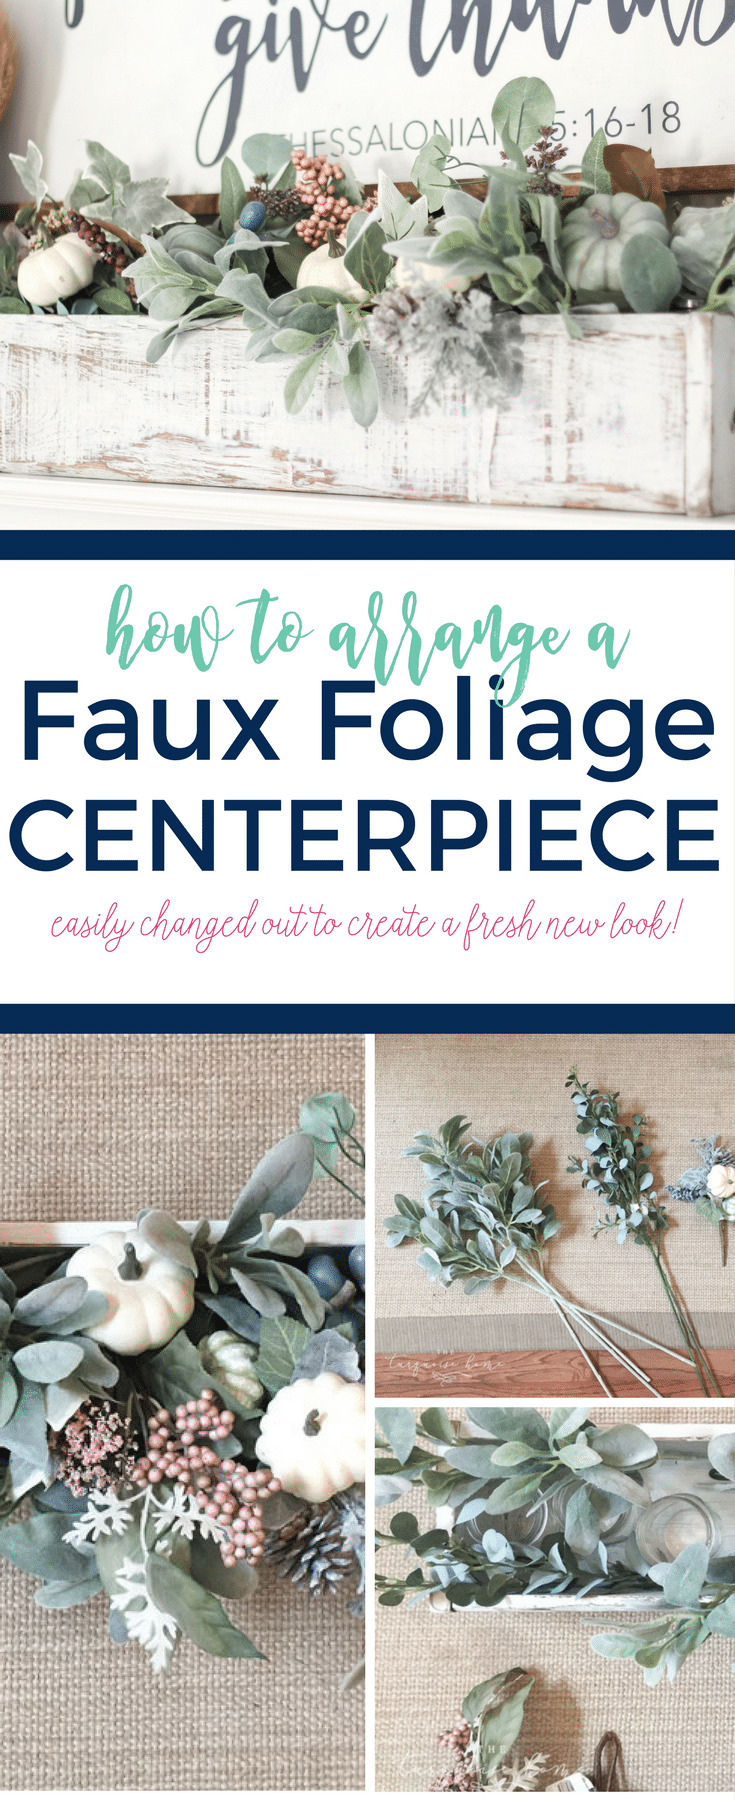 How to Arrange a Faux Foliage Centerpiece in a Wooden Box - so cute!!